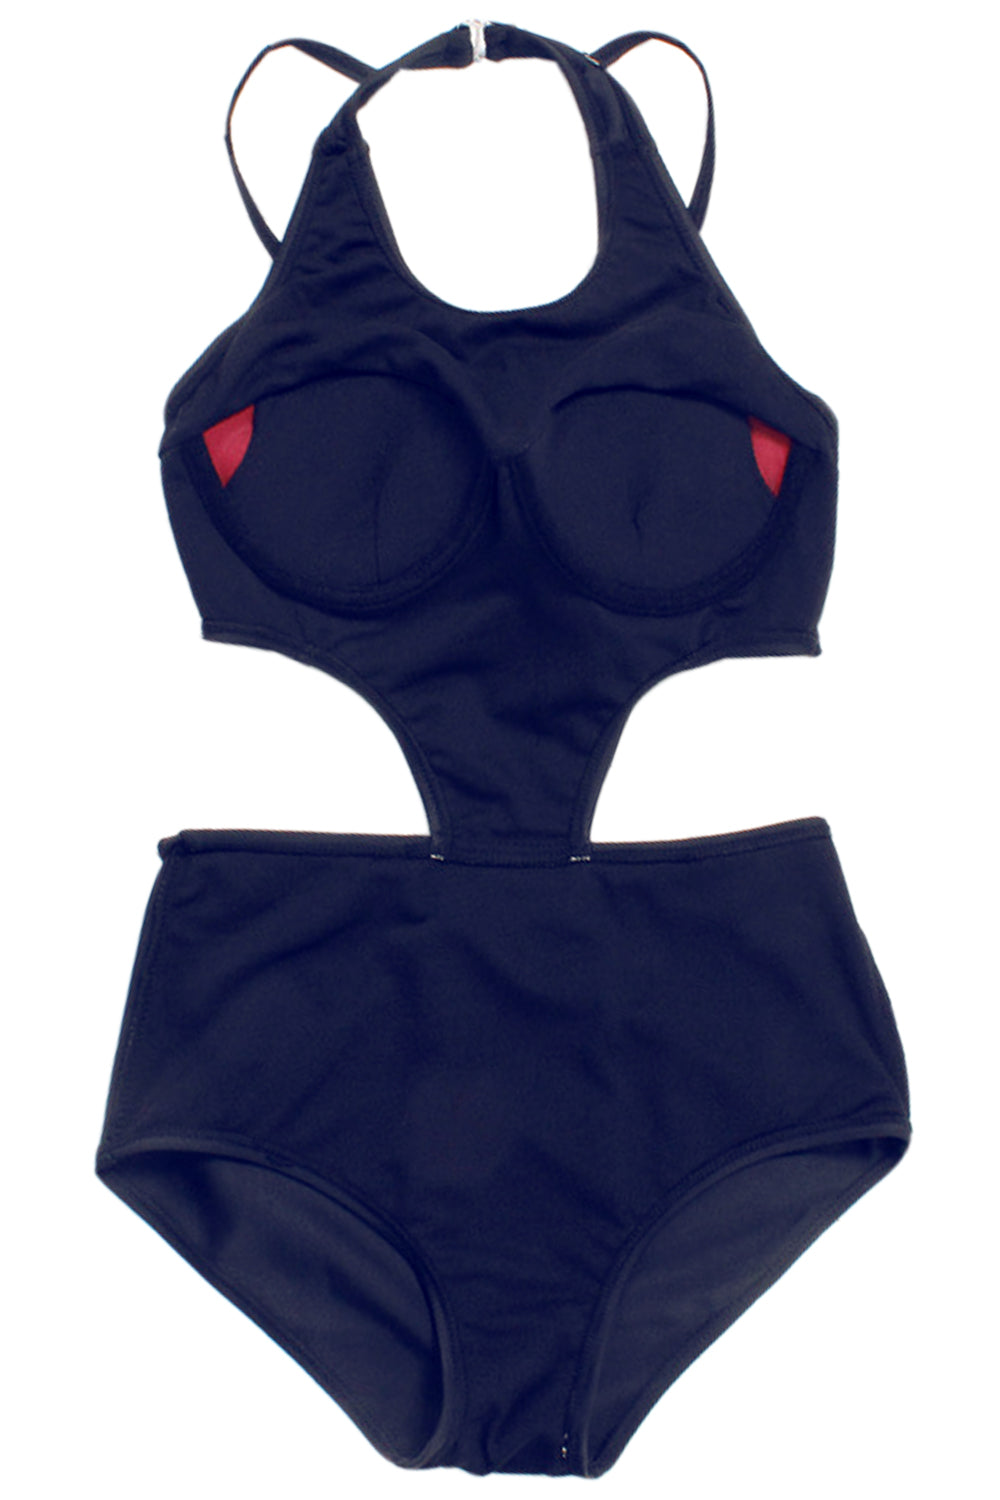 Iyasson Navy Blue High Waisted One-piece Swimsuit